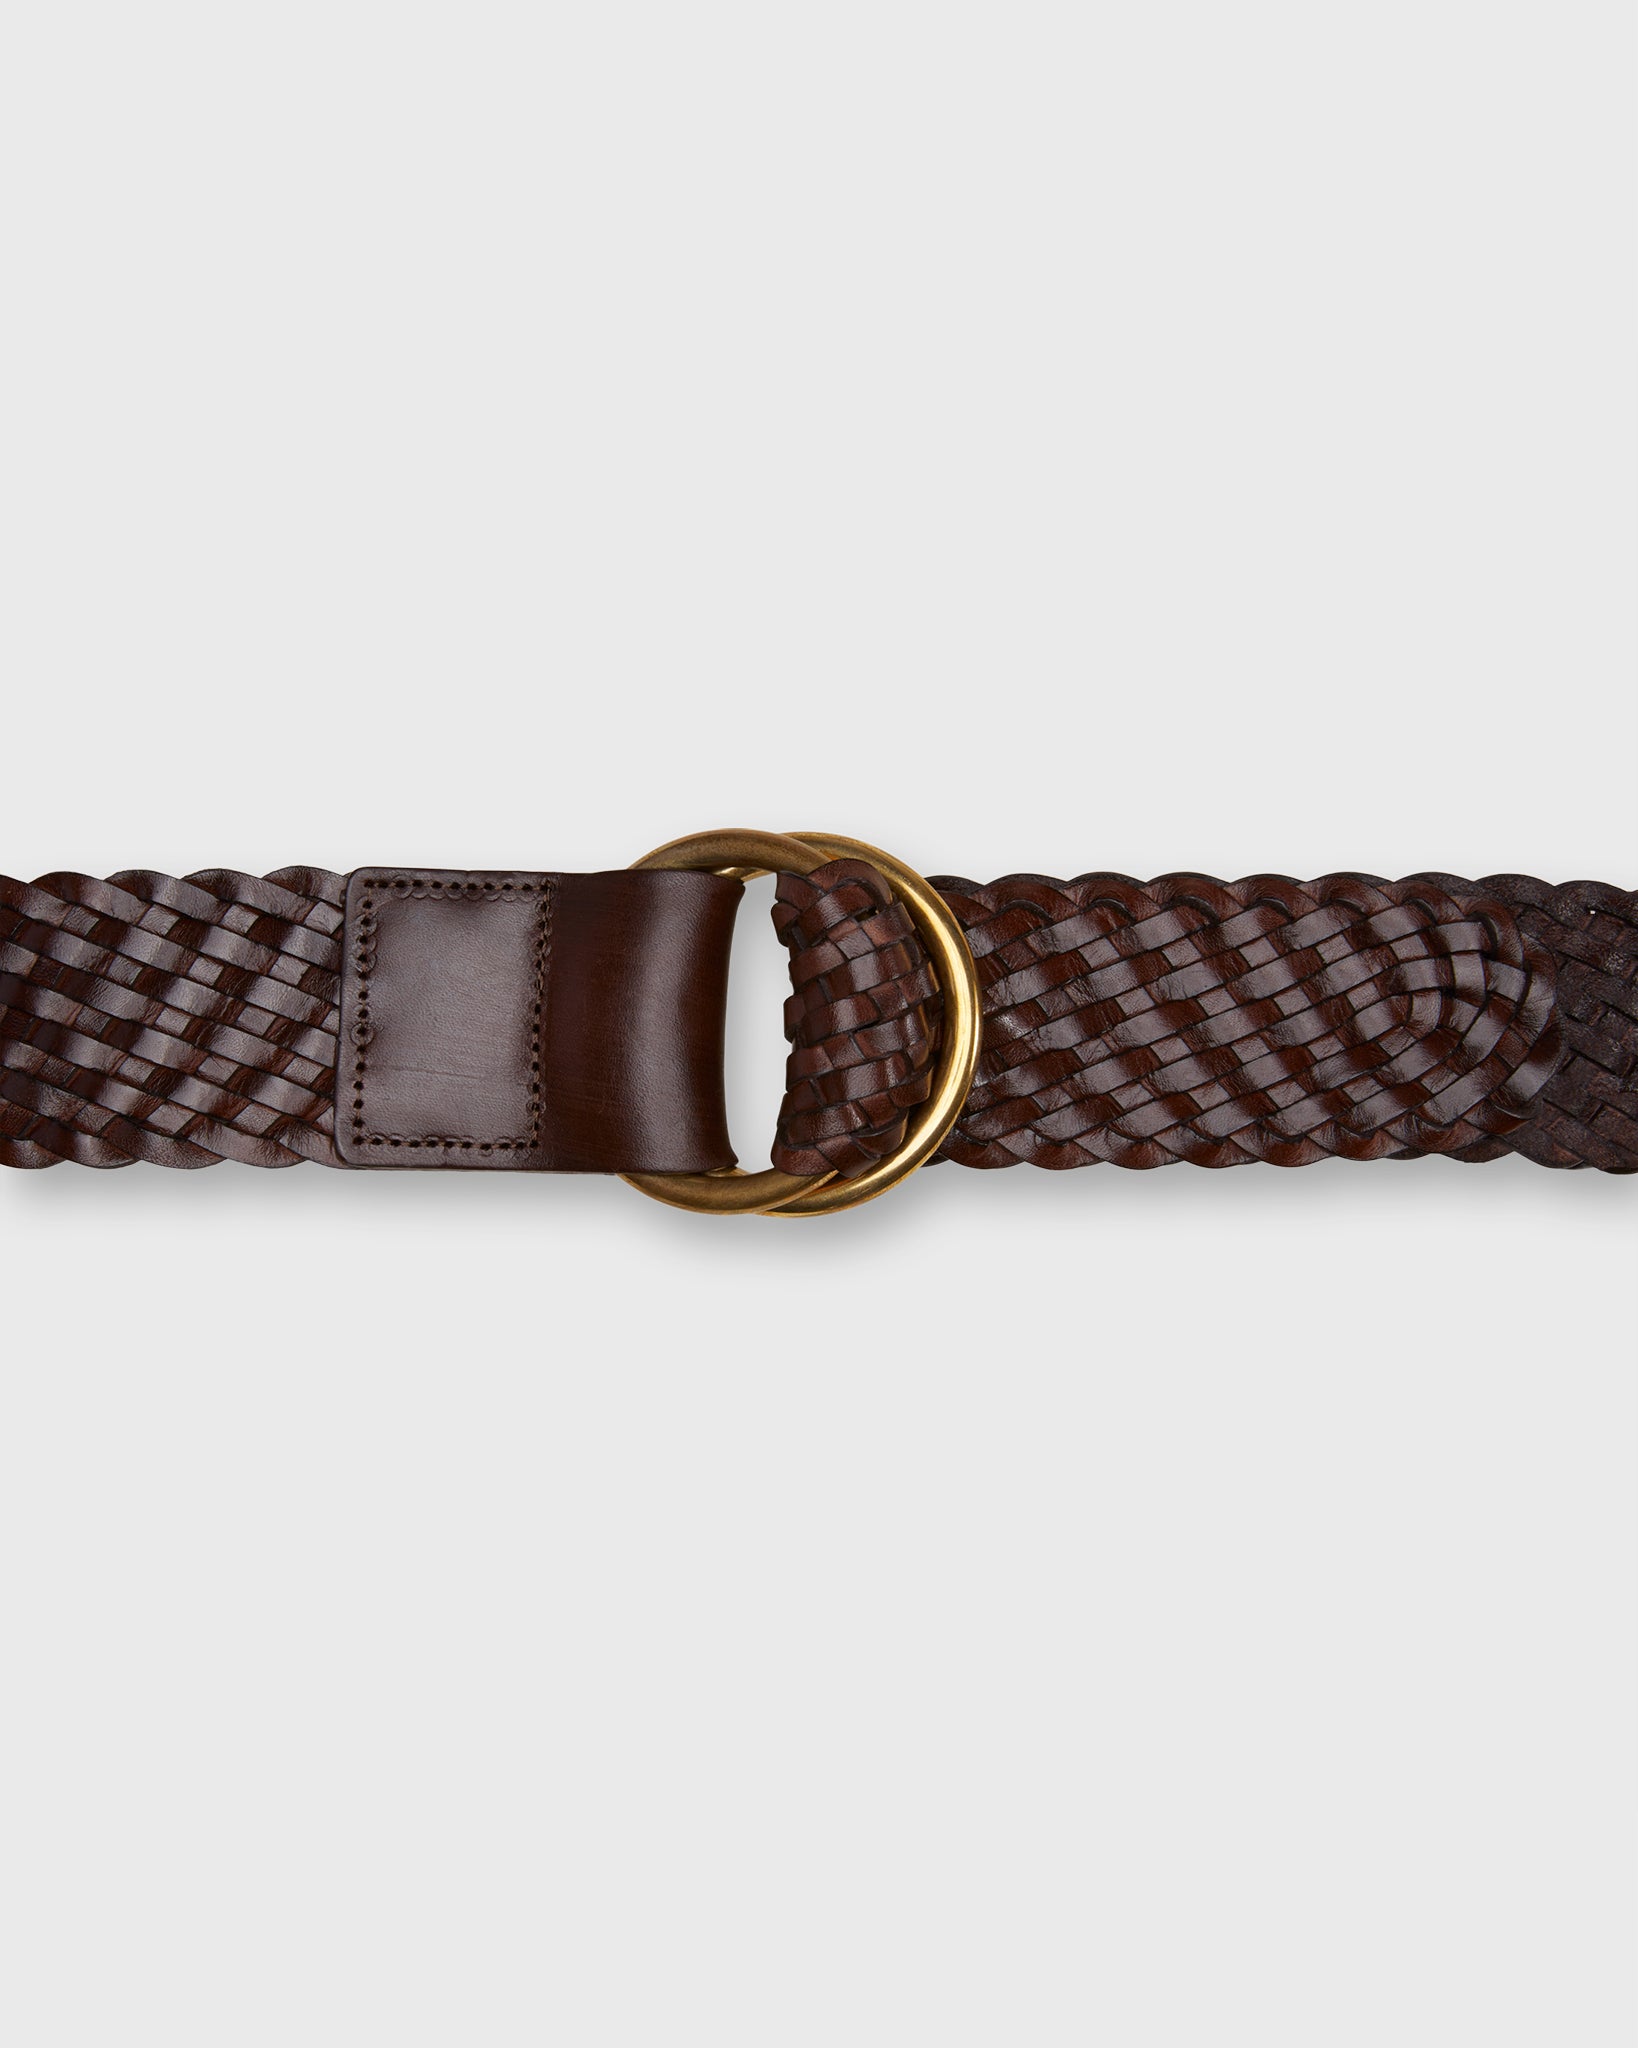 BRAIDED LEATHER BELT WITH RING BUCKLE